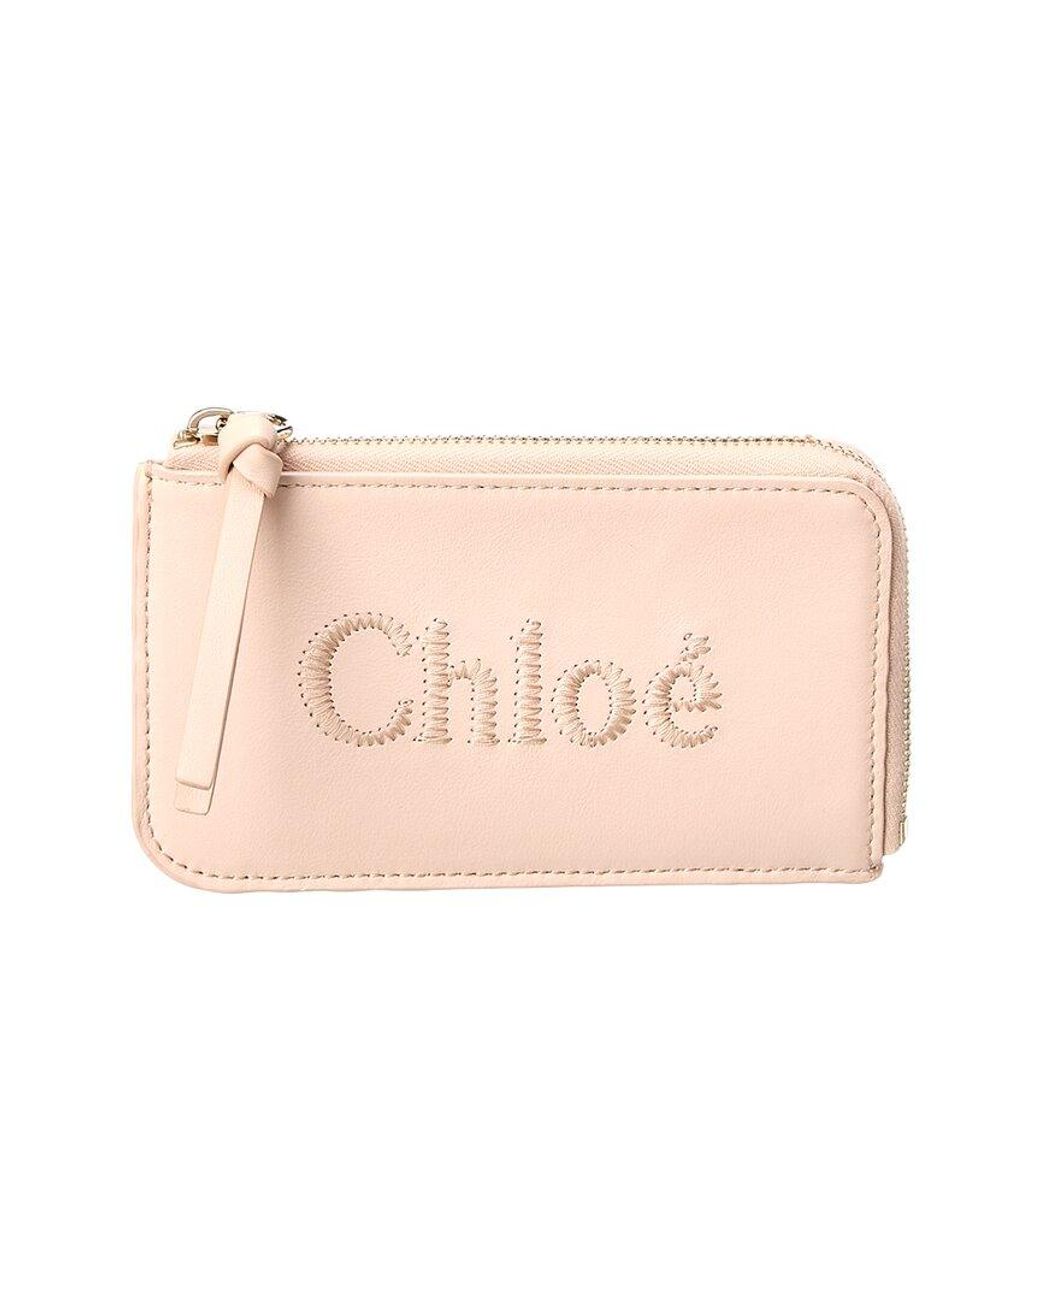 Chloé Sense Leather Coin Purse in Pink | Lyst Canada